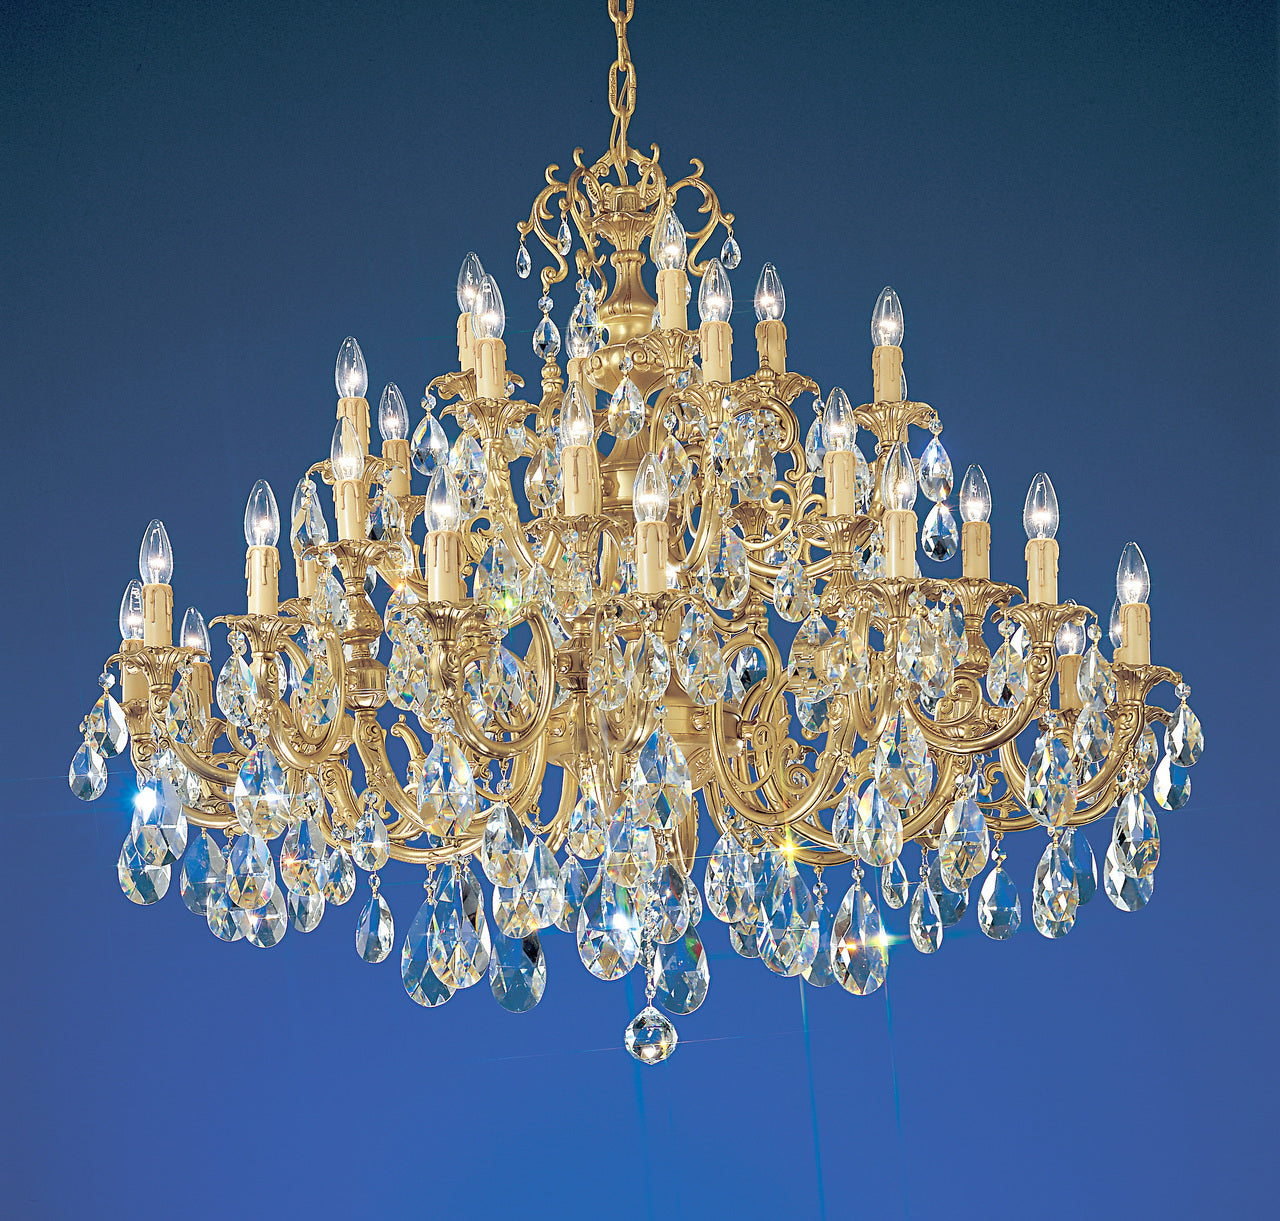 Classic Lighting 5736 SBB C Princeton Crystal/Cast Brass Chandelier in Satin Bronze/Brown Patina (Imported from Spain)